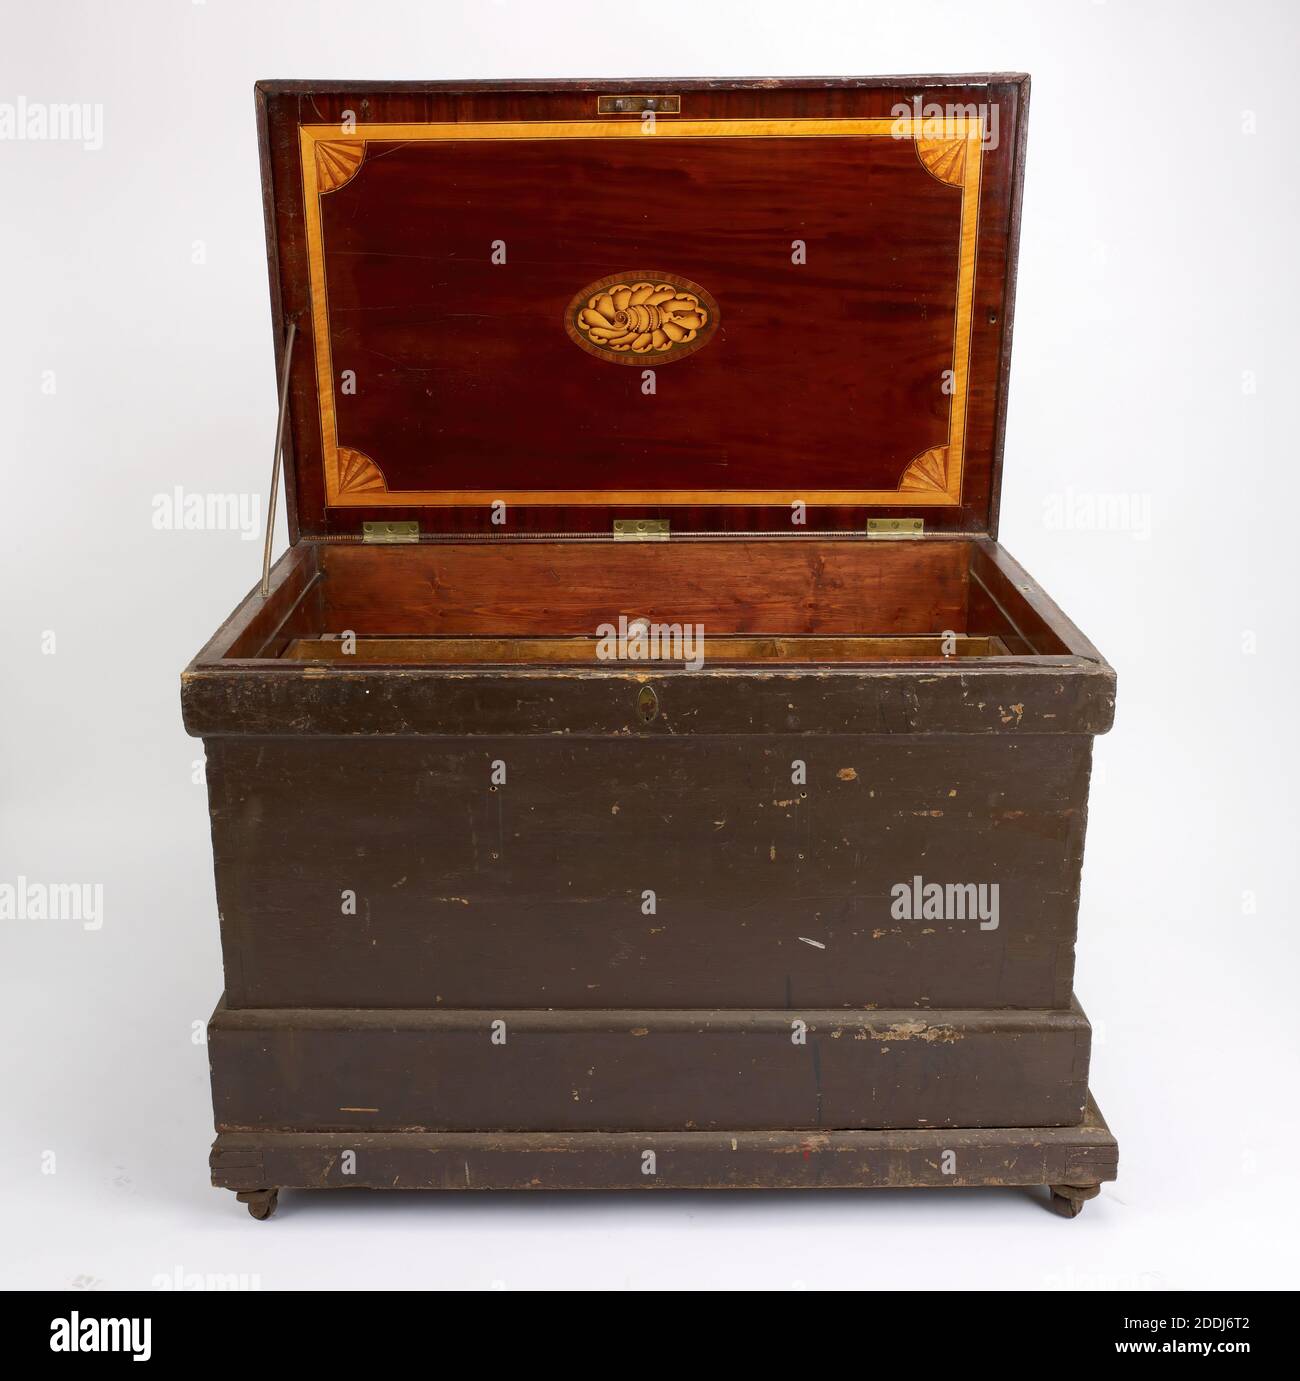 The 'Dolling' Tool Chest, 1780-1790, Large tool chest with hinged lid to top. pine carcass, the interior fitments of oak & pine, veneered with Spanish mahogany, inlaid with various woods., Social history, Wooden, Box, Work, Carpenter Stock Photo